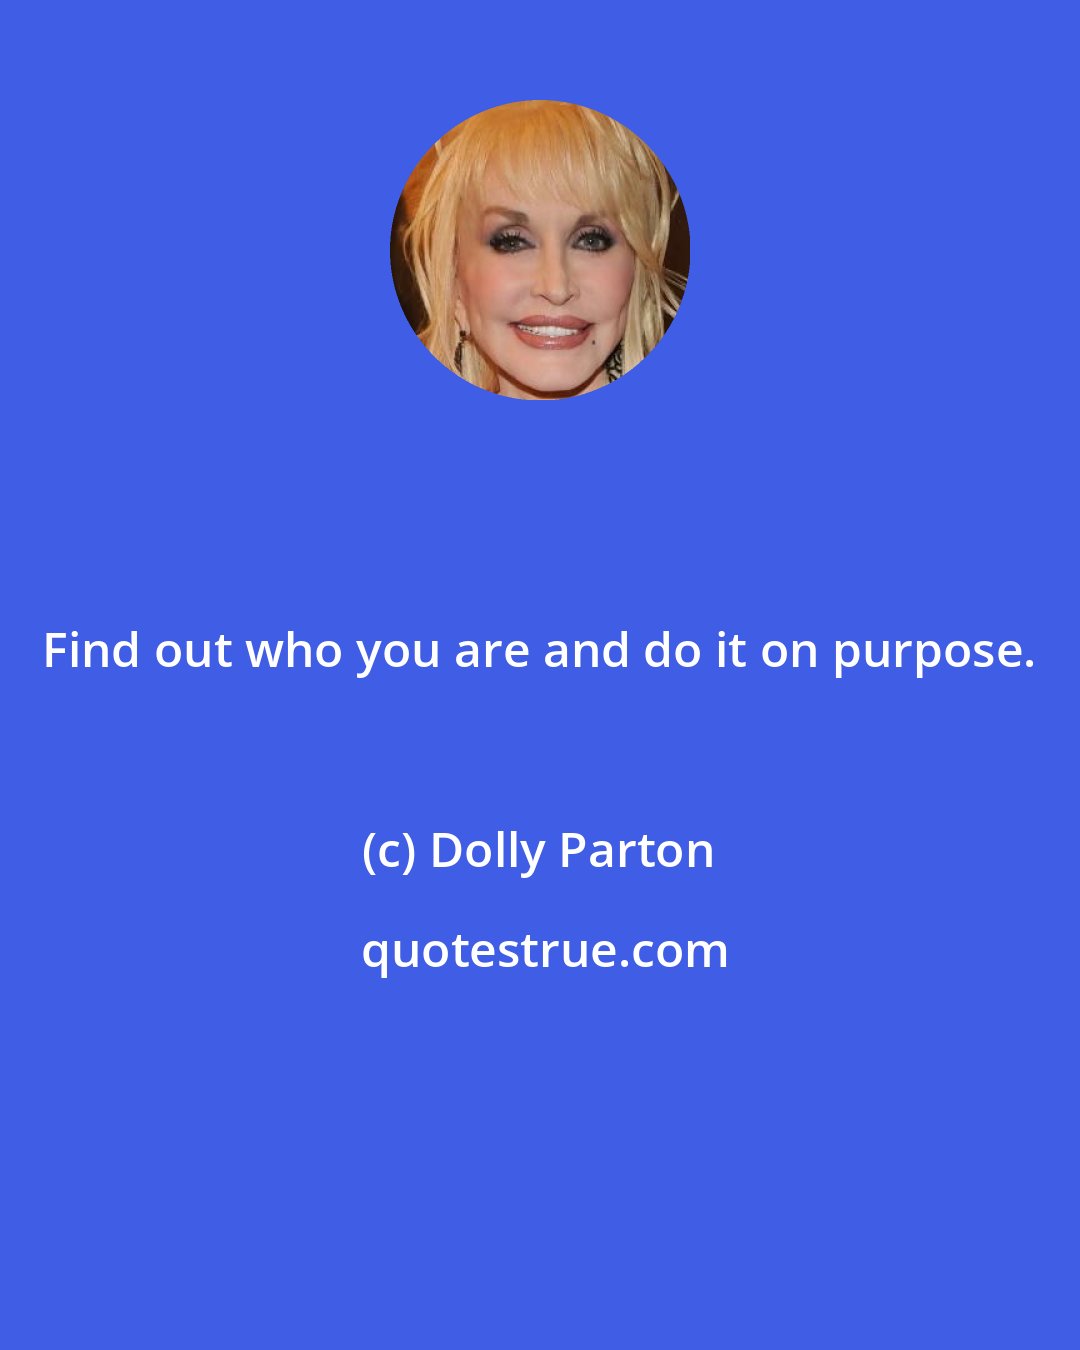 Dolly Parton: Find out who you are and do it on purpose.